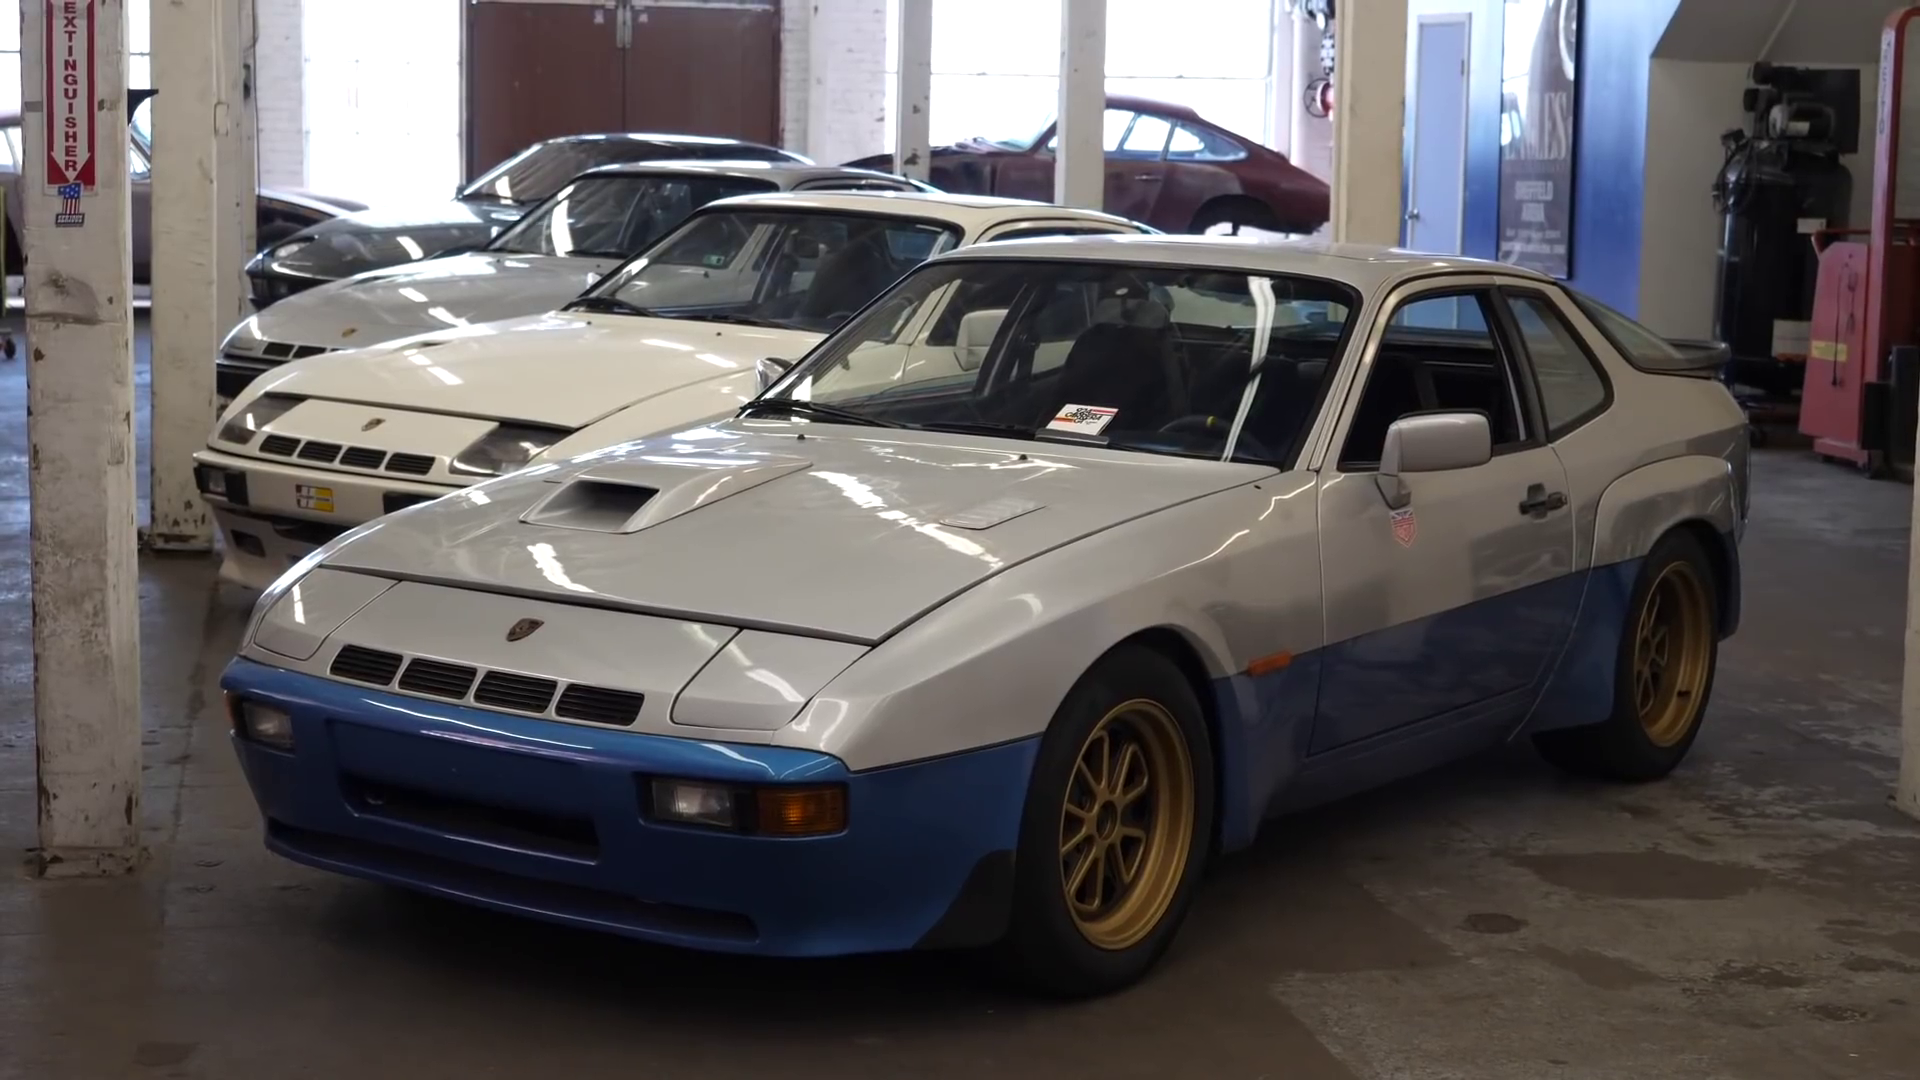 Popular YouTuber Visits Famous Porsche Collector in L.A.